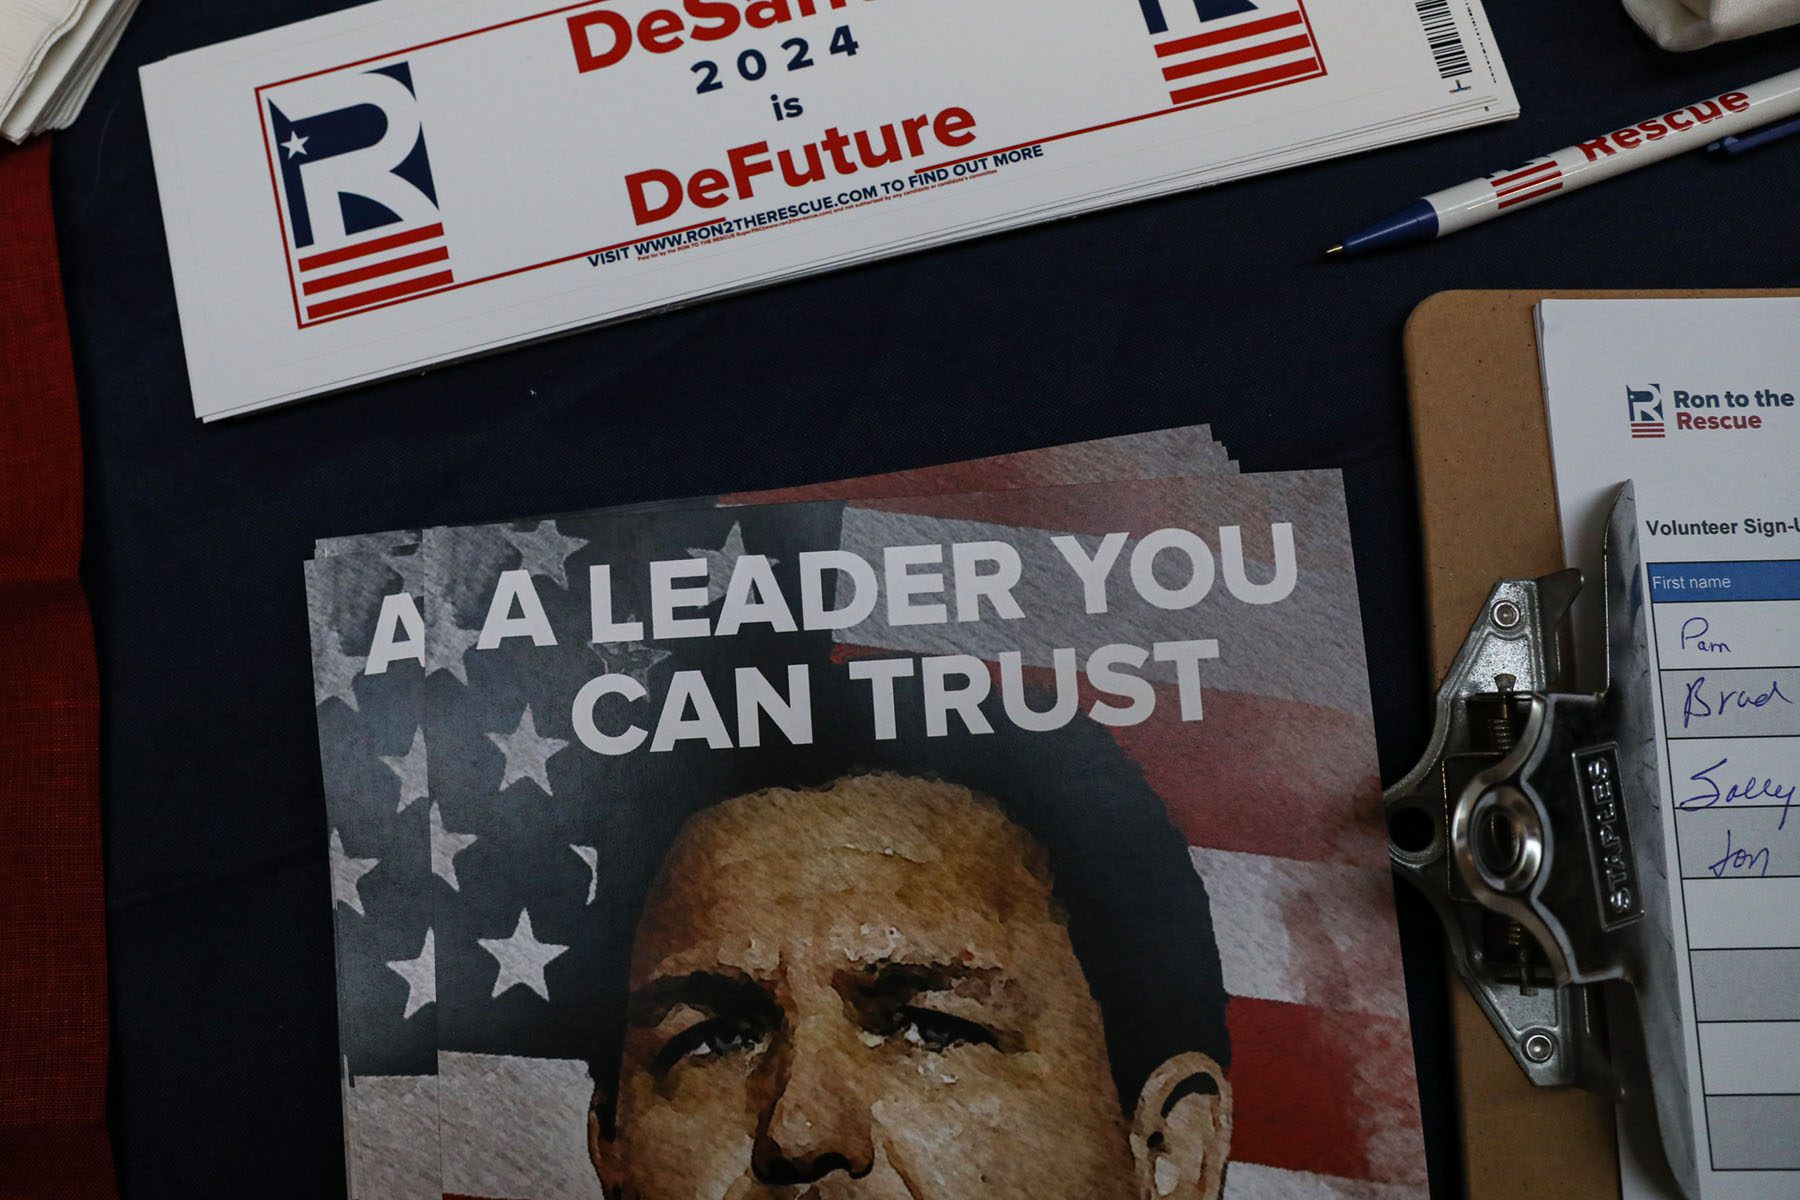 Bumper stickers that read "DeSantis 2024 is DeFuture" and a picture of Ron DeSantis inscribed with the words "A leader you can trust" sit on a vendor's table at the New Hampshire Republican State Committee fundraiser.